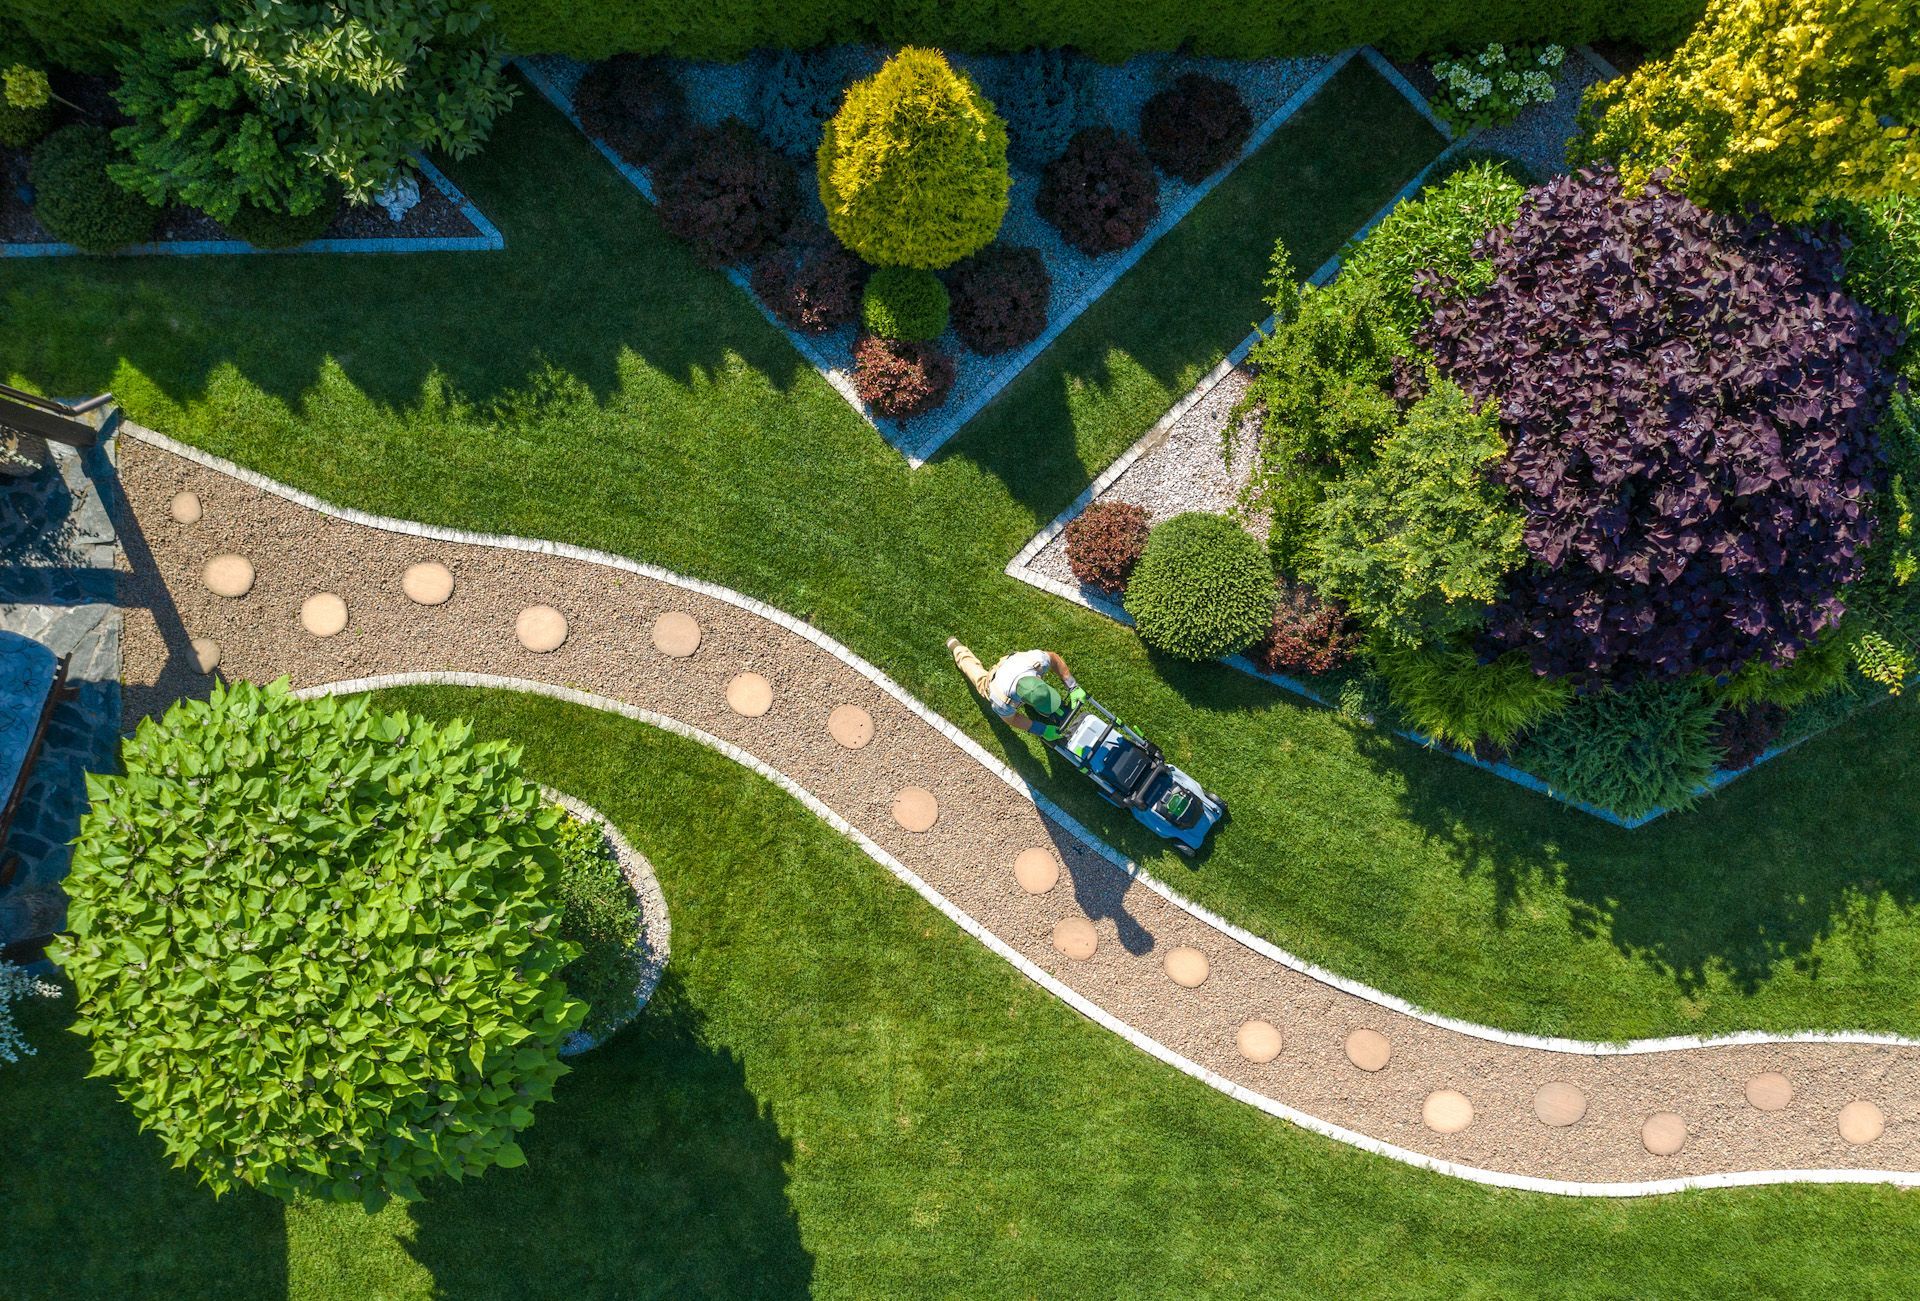 An aerial view of a person mowing a lush green lawn